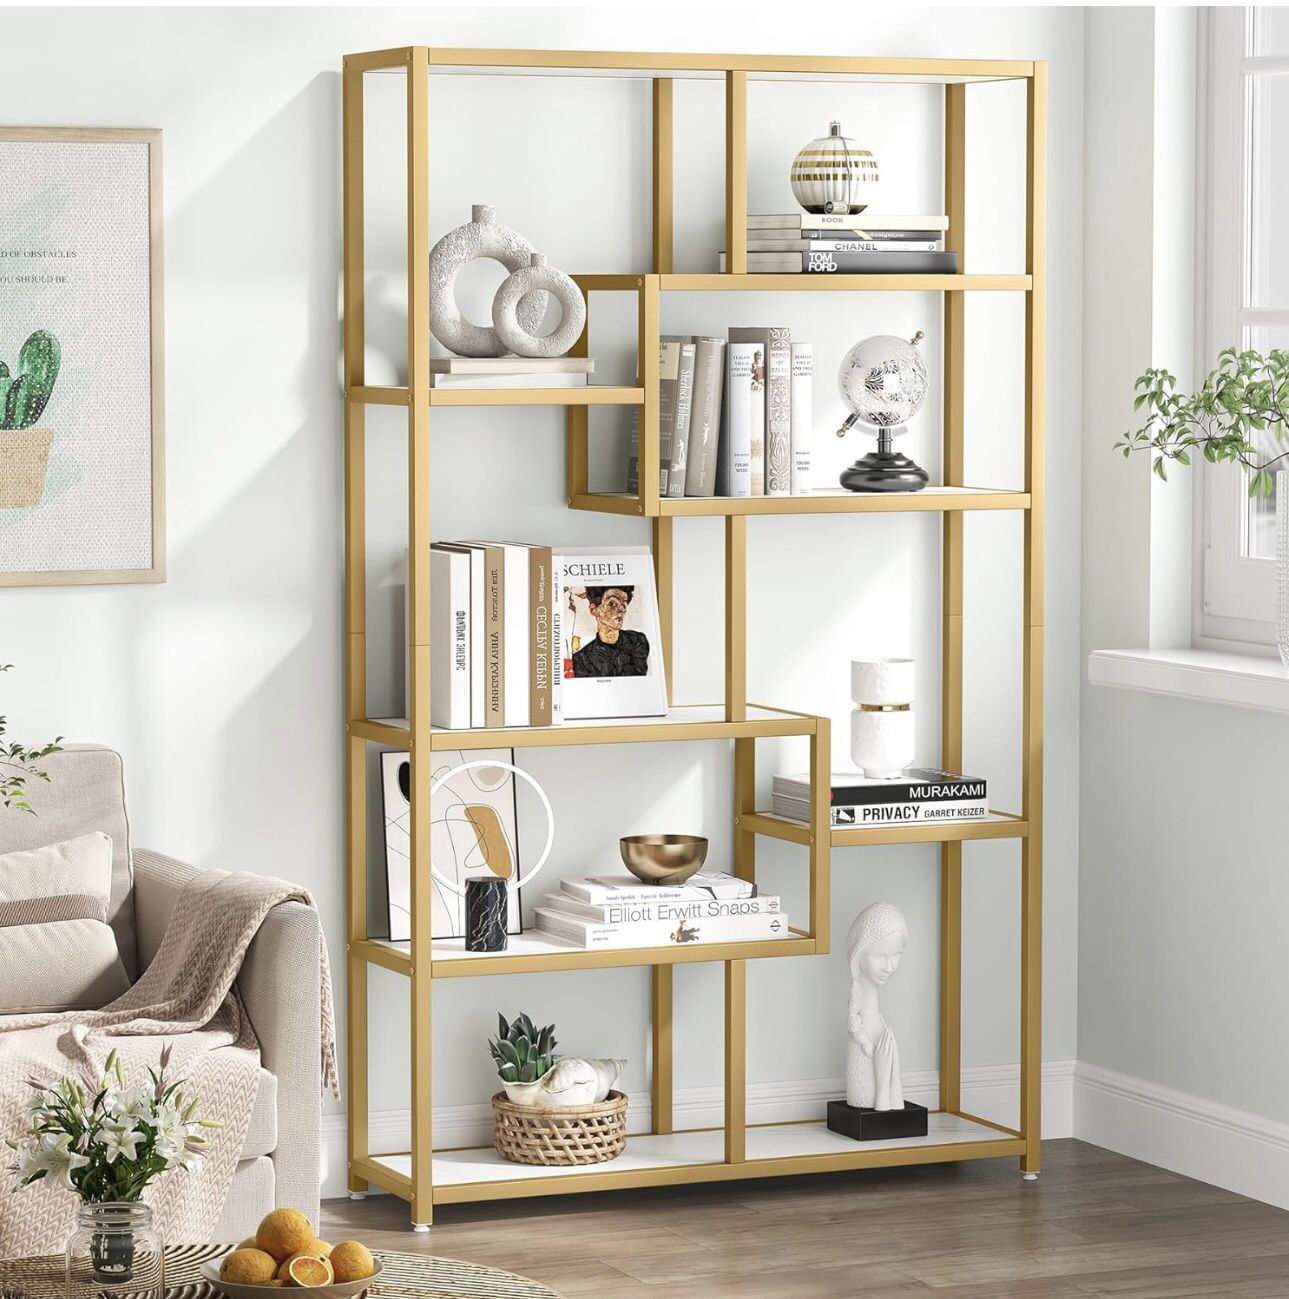 New assembled F1776 Bookshelf 5 Tier Etagere Bookcase, Modern Gold Book Shelf Organizer Display Rack with 8 Open Storage Shelf for Home Office, Living